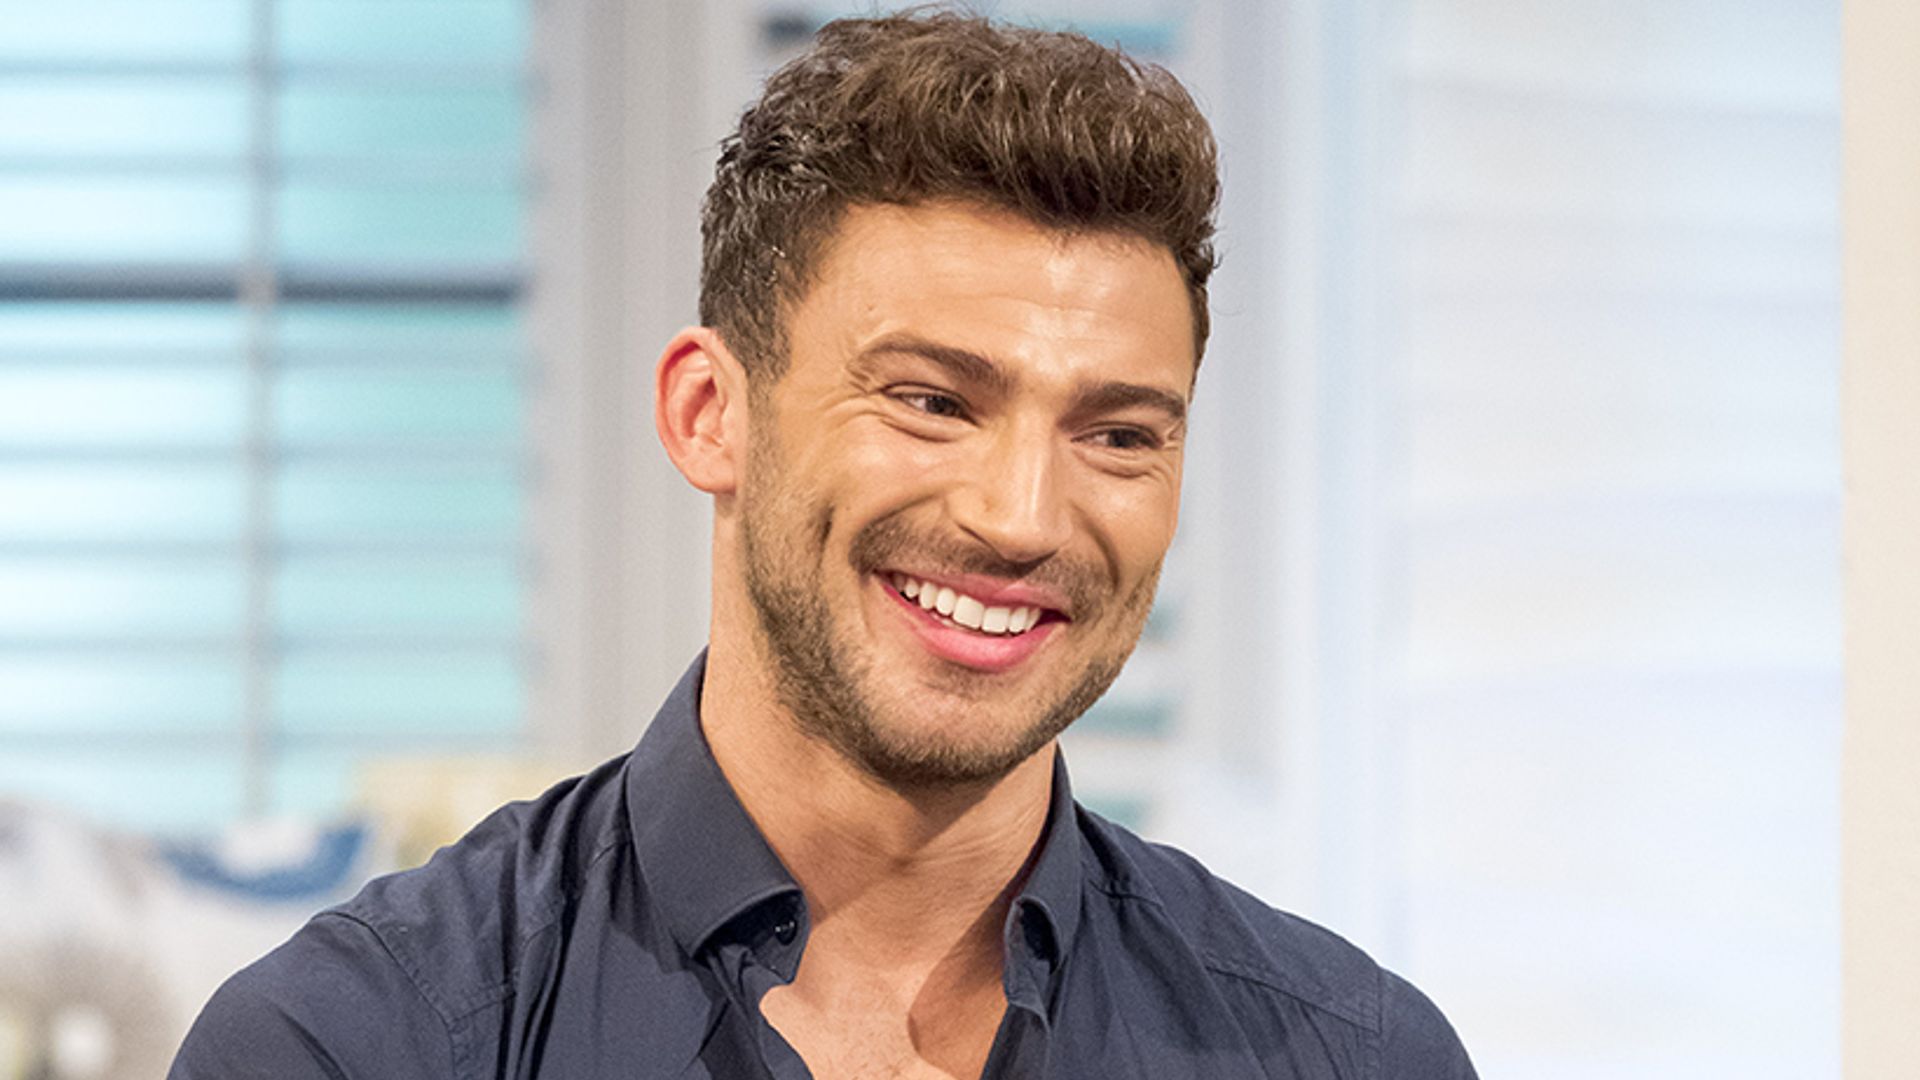 Jake Quickenden shocks fans with bloodied hair transplant photo